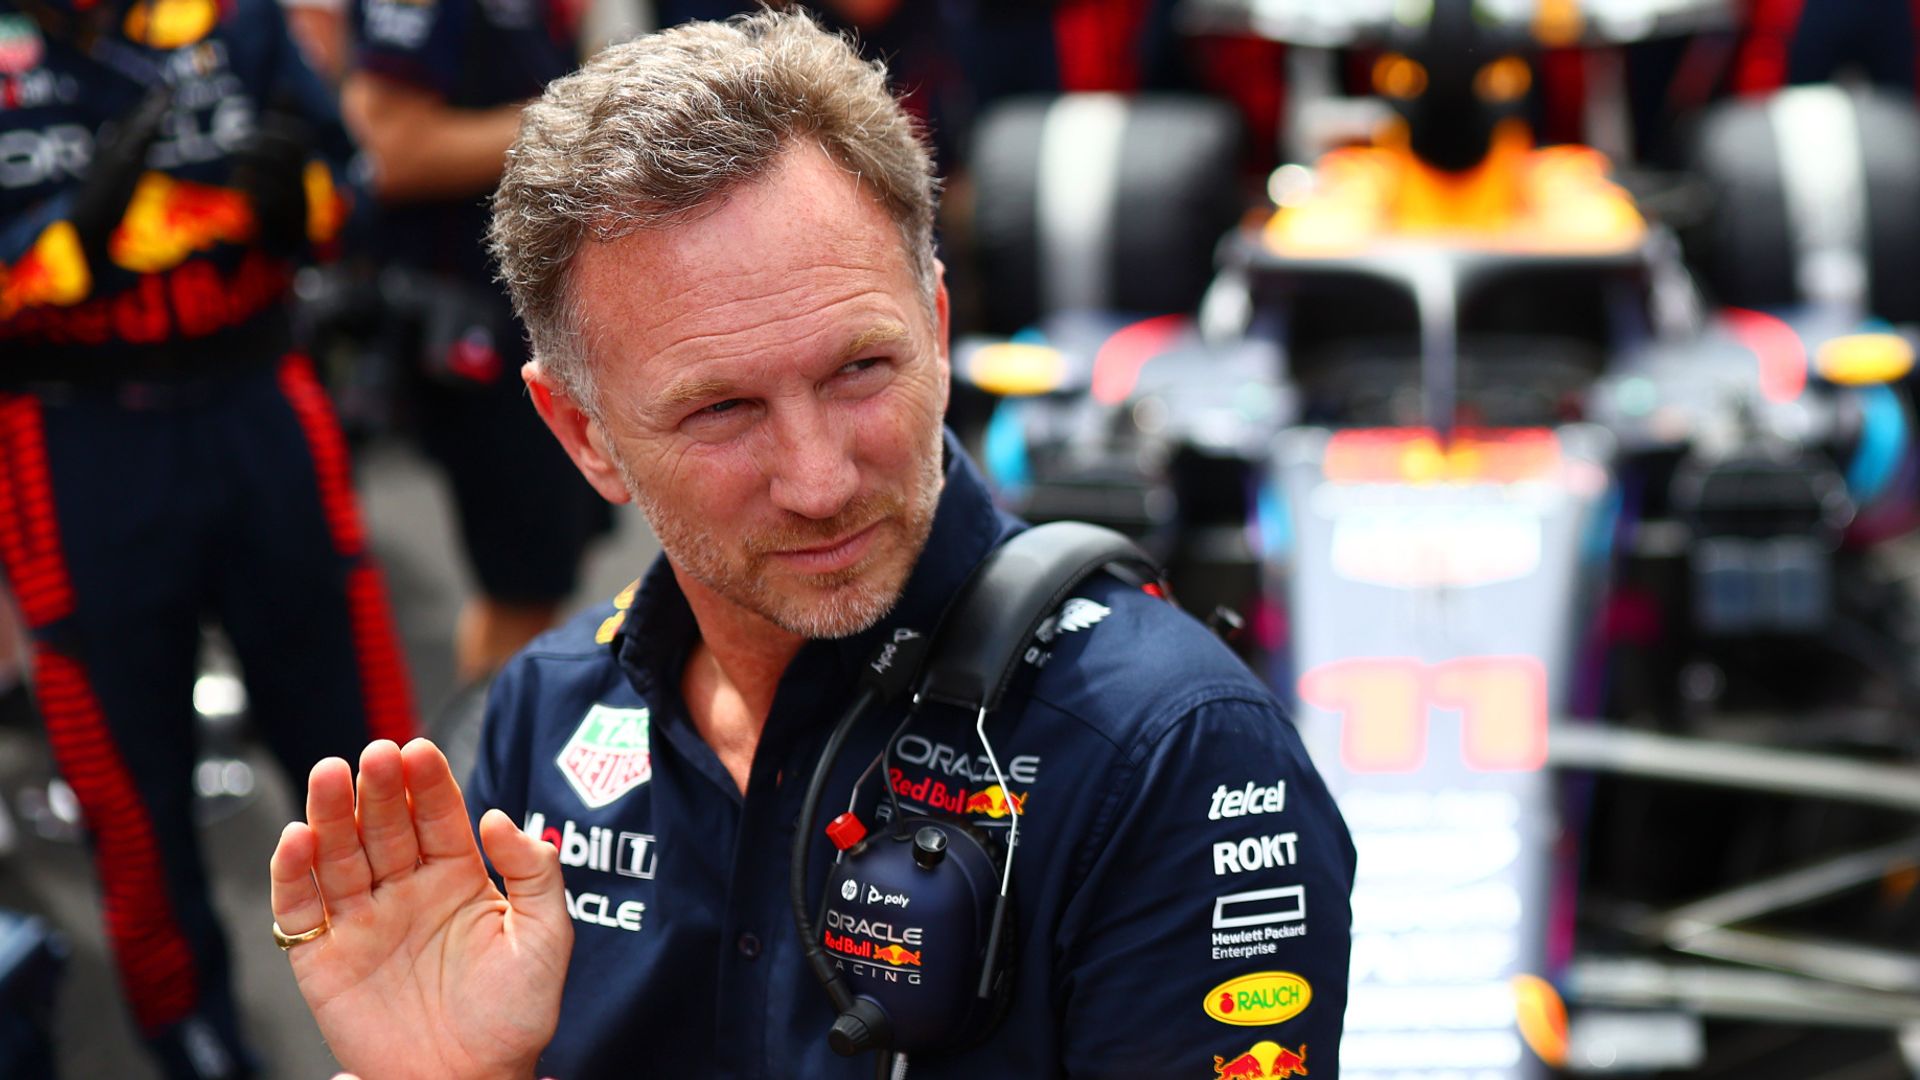 Horner: Where are the others? Where did Ferrari and Mercedes go?